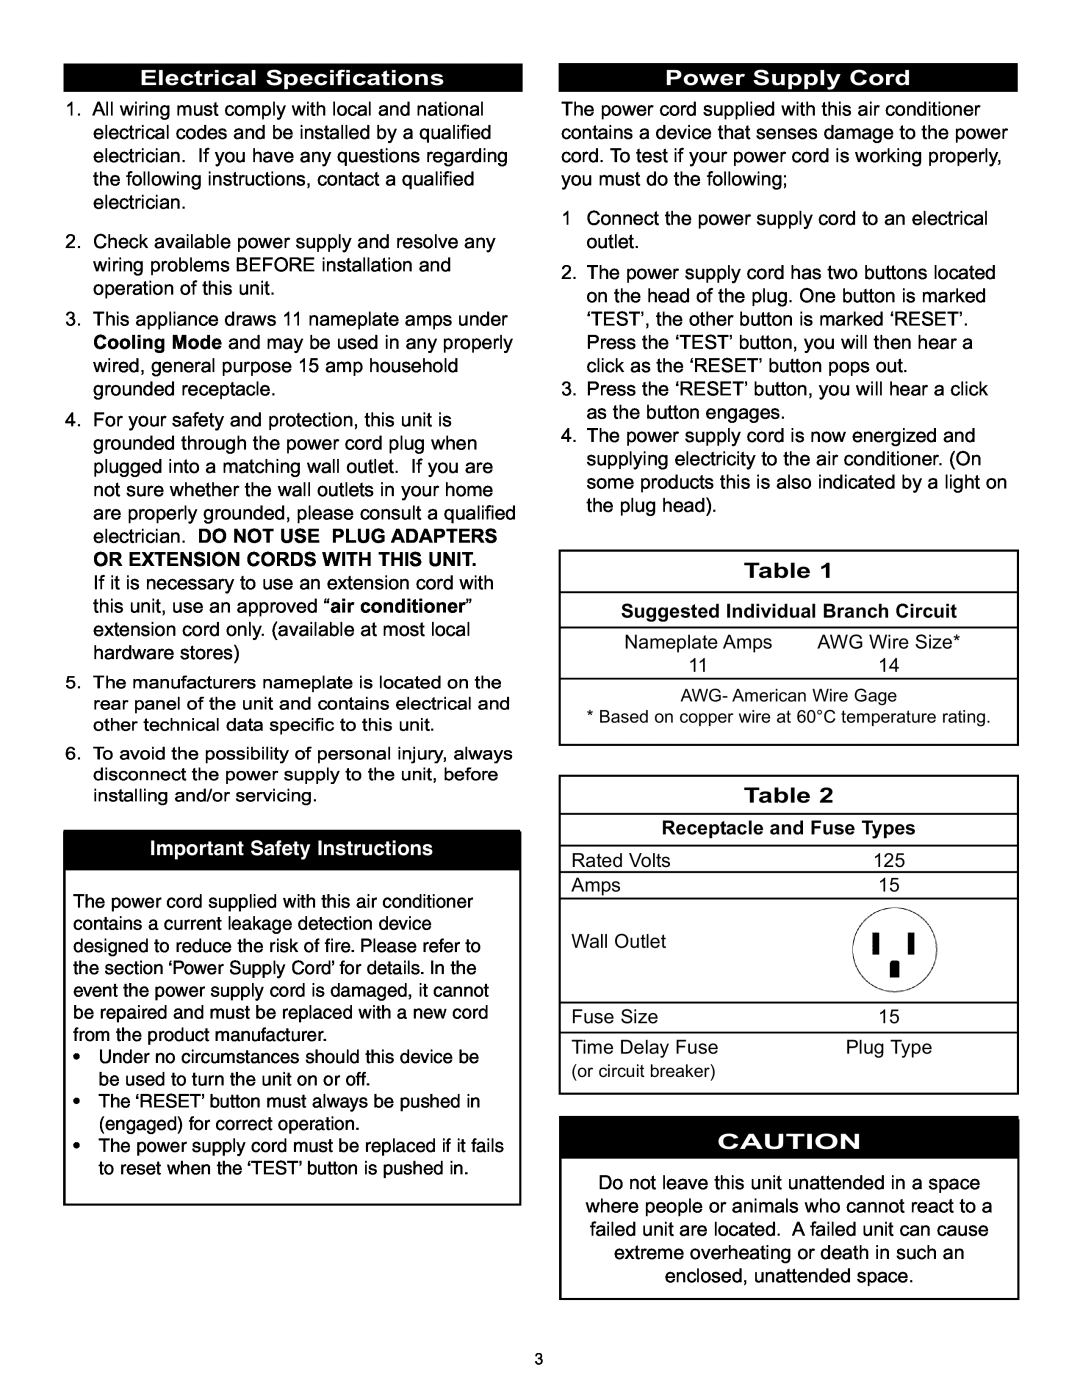 Danby DPAC120061 owner manual Electrical Specifications, Power Supply Cord, Important Safety Instructions 